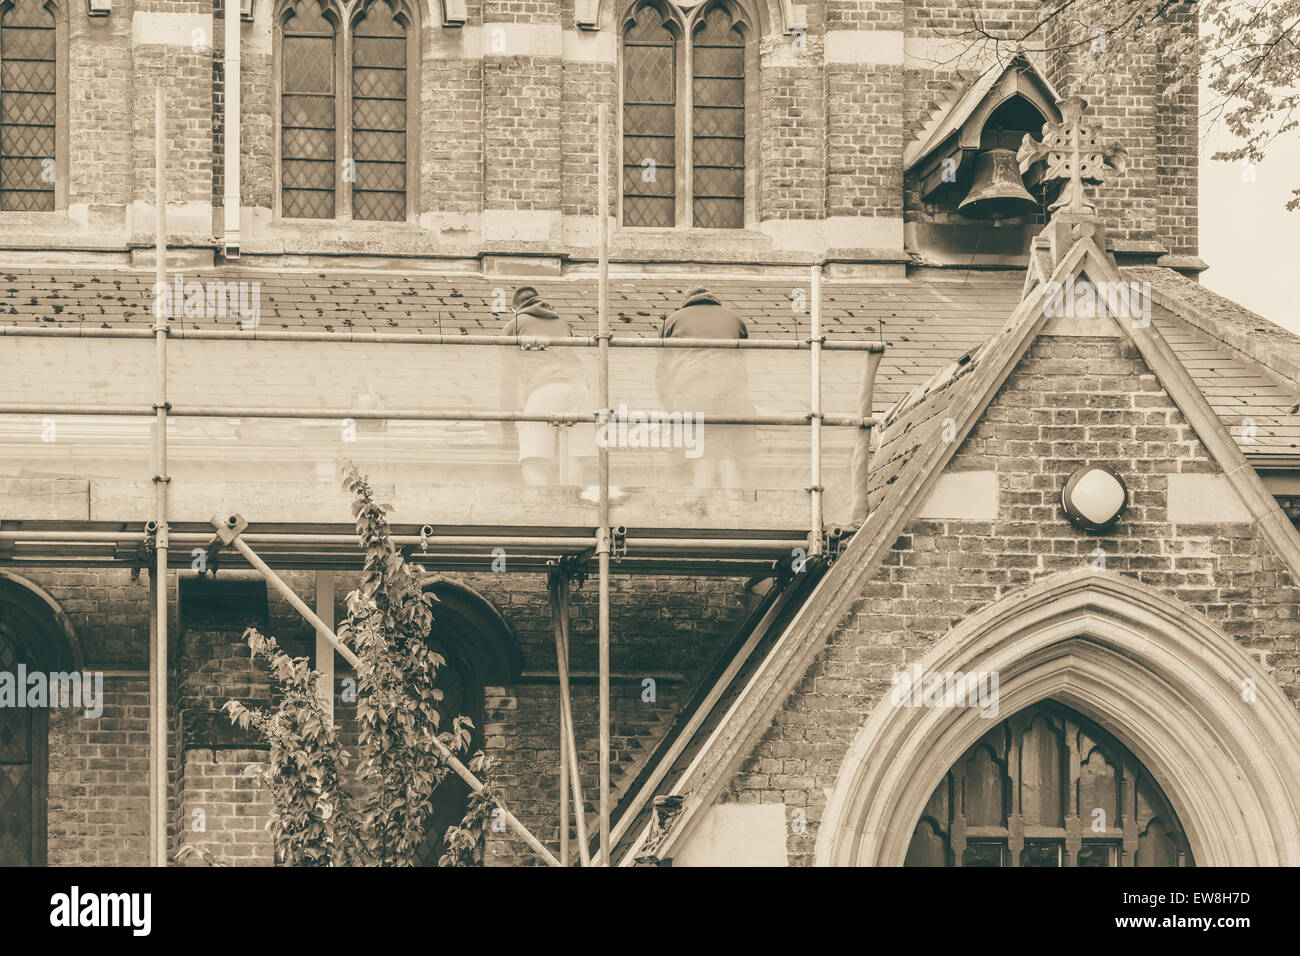 Builders repairing roof of a church standing on scaffolding, church in background Stock Photo